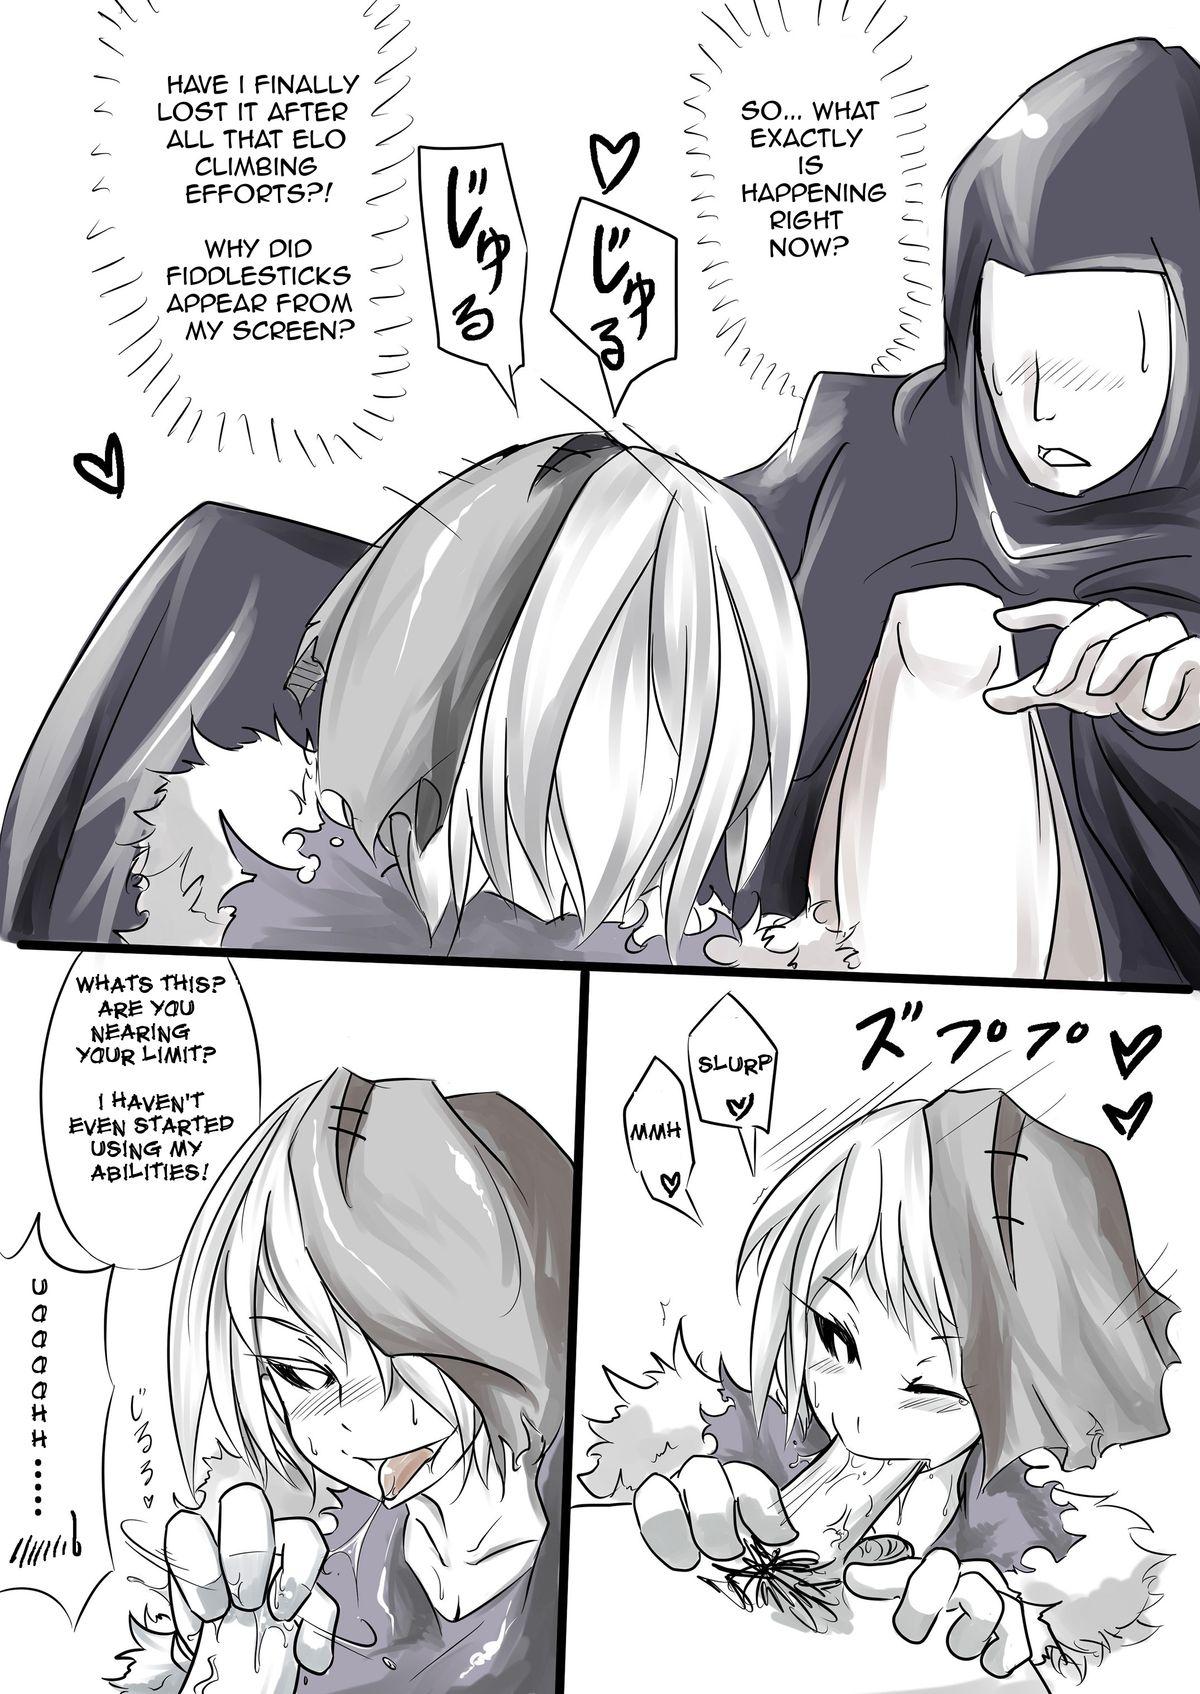 Creampie I FEEL YOUR FEAR - League of legends Gay Pissing - Page 7